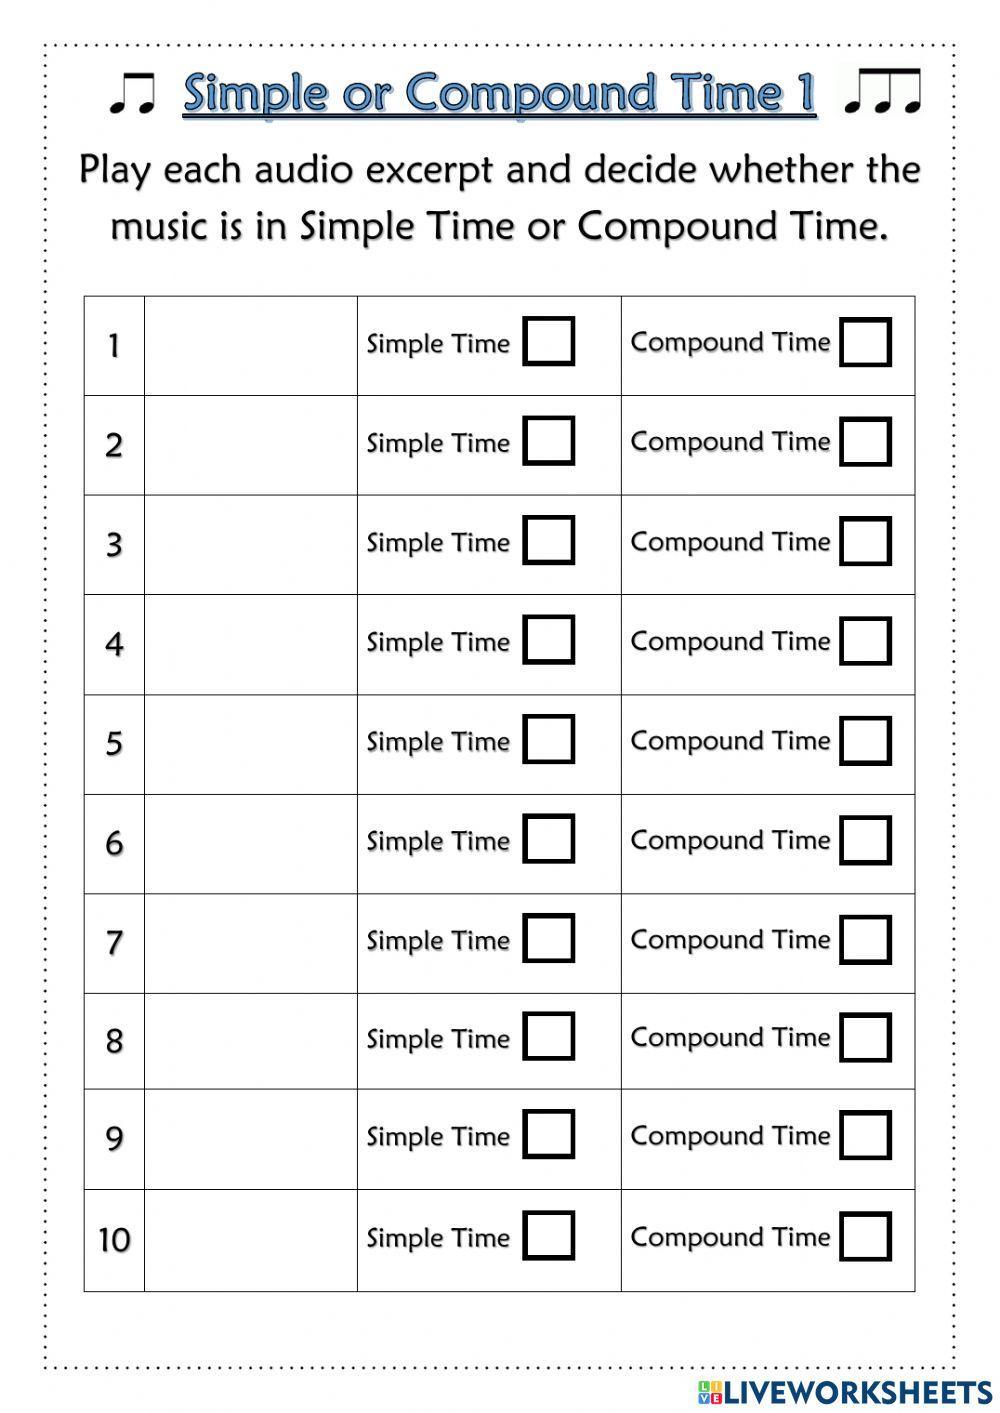 Music - Simple or Compound Time 1